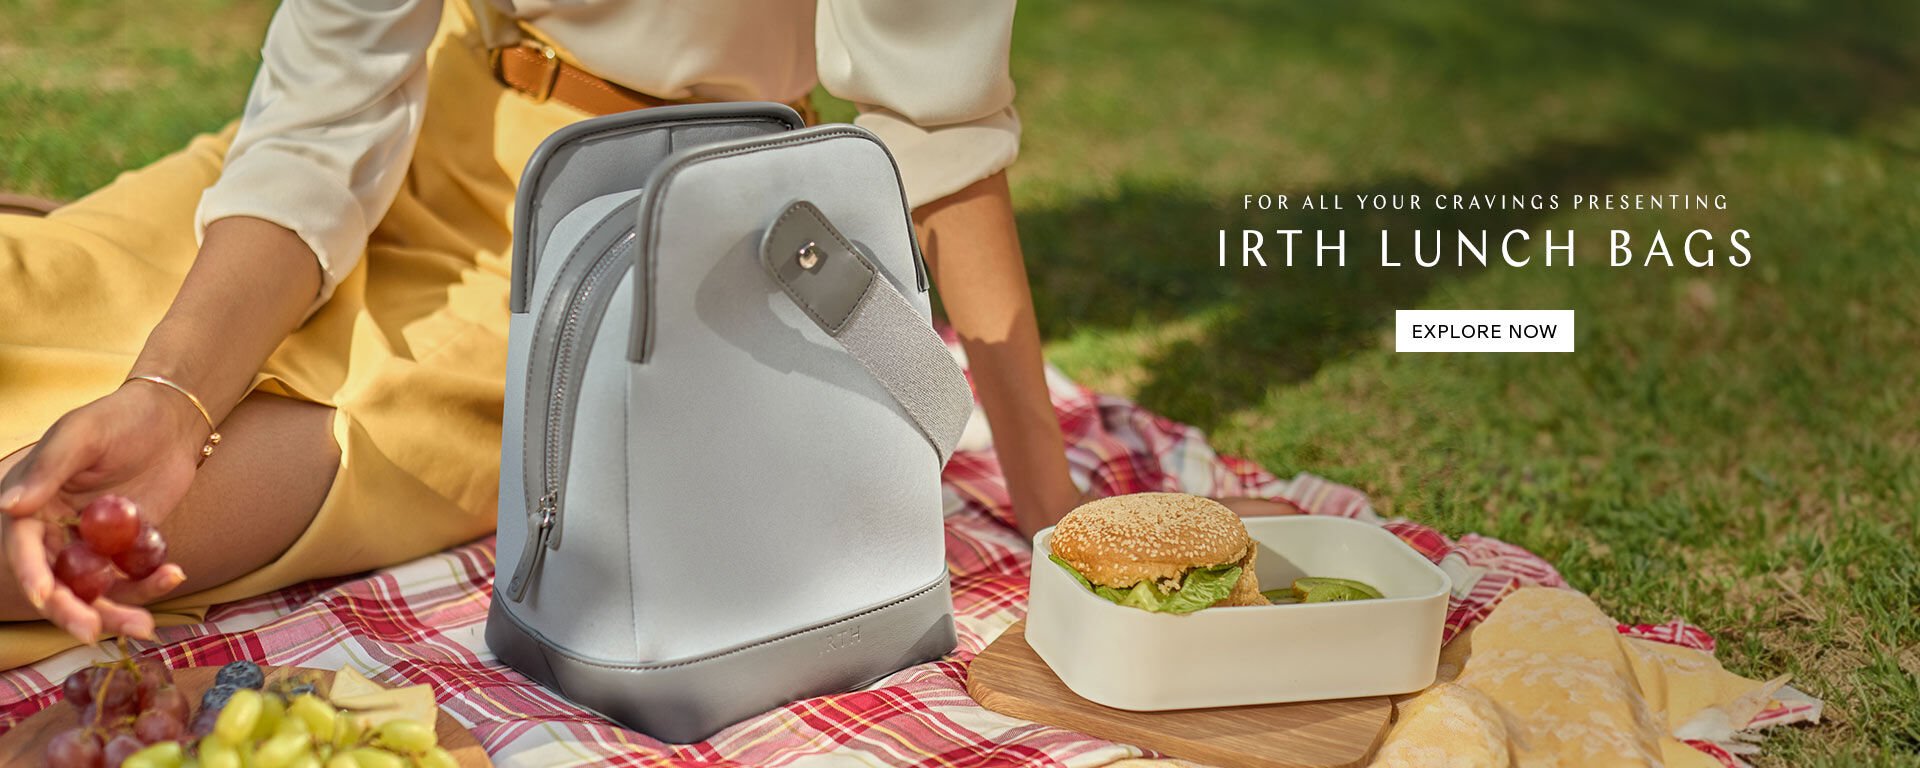 Titan's Irth expands product offering with canvas bag line